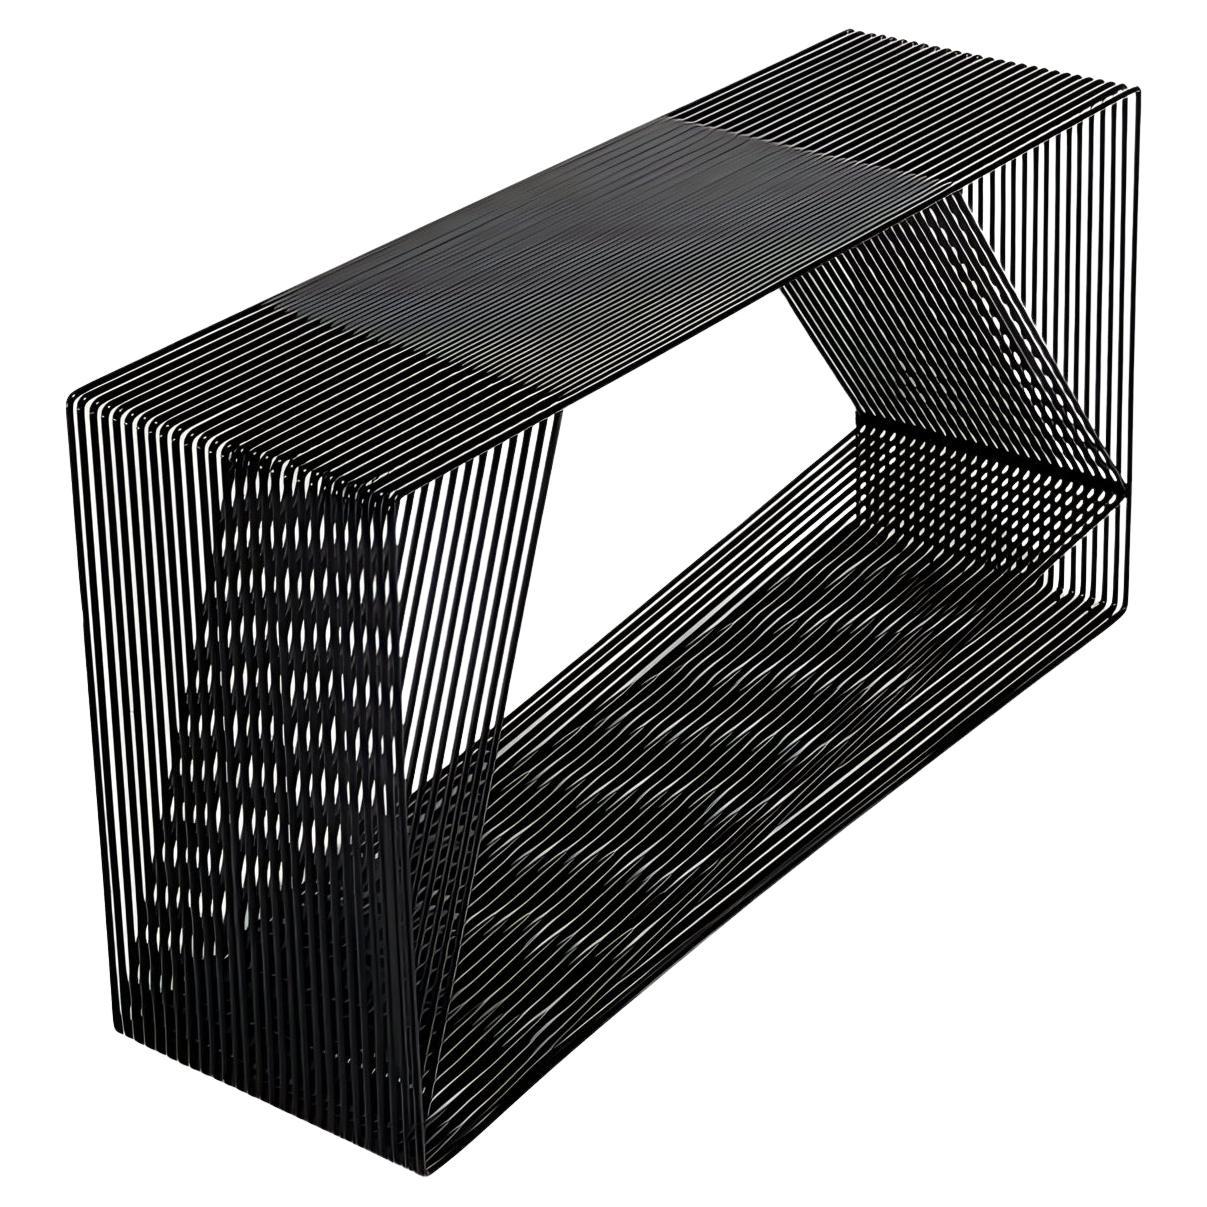 LOOP - Contemporary Minimal Geometric Steel Rod Console by TJOKEEFE For Sale